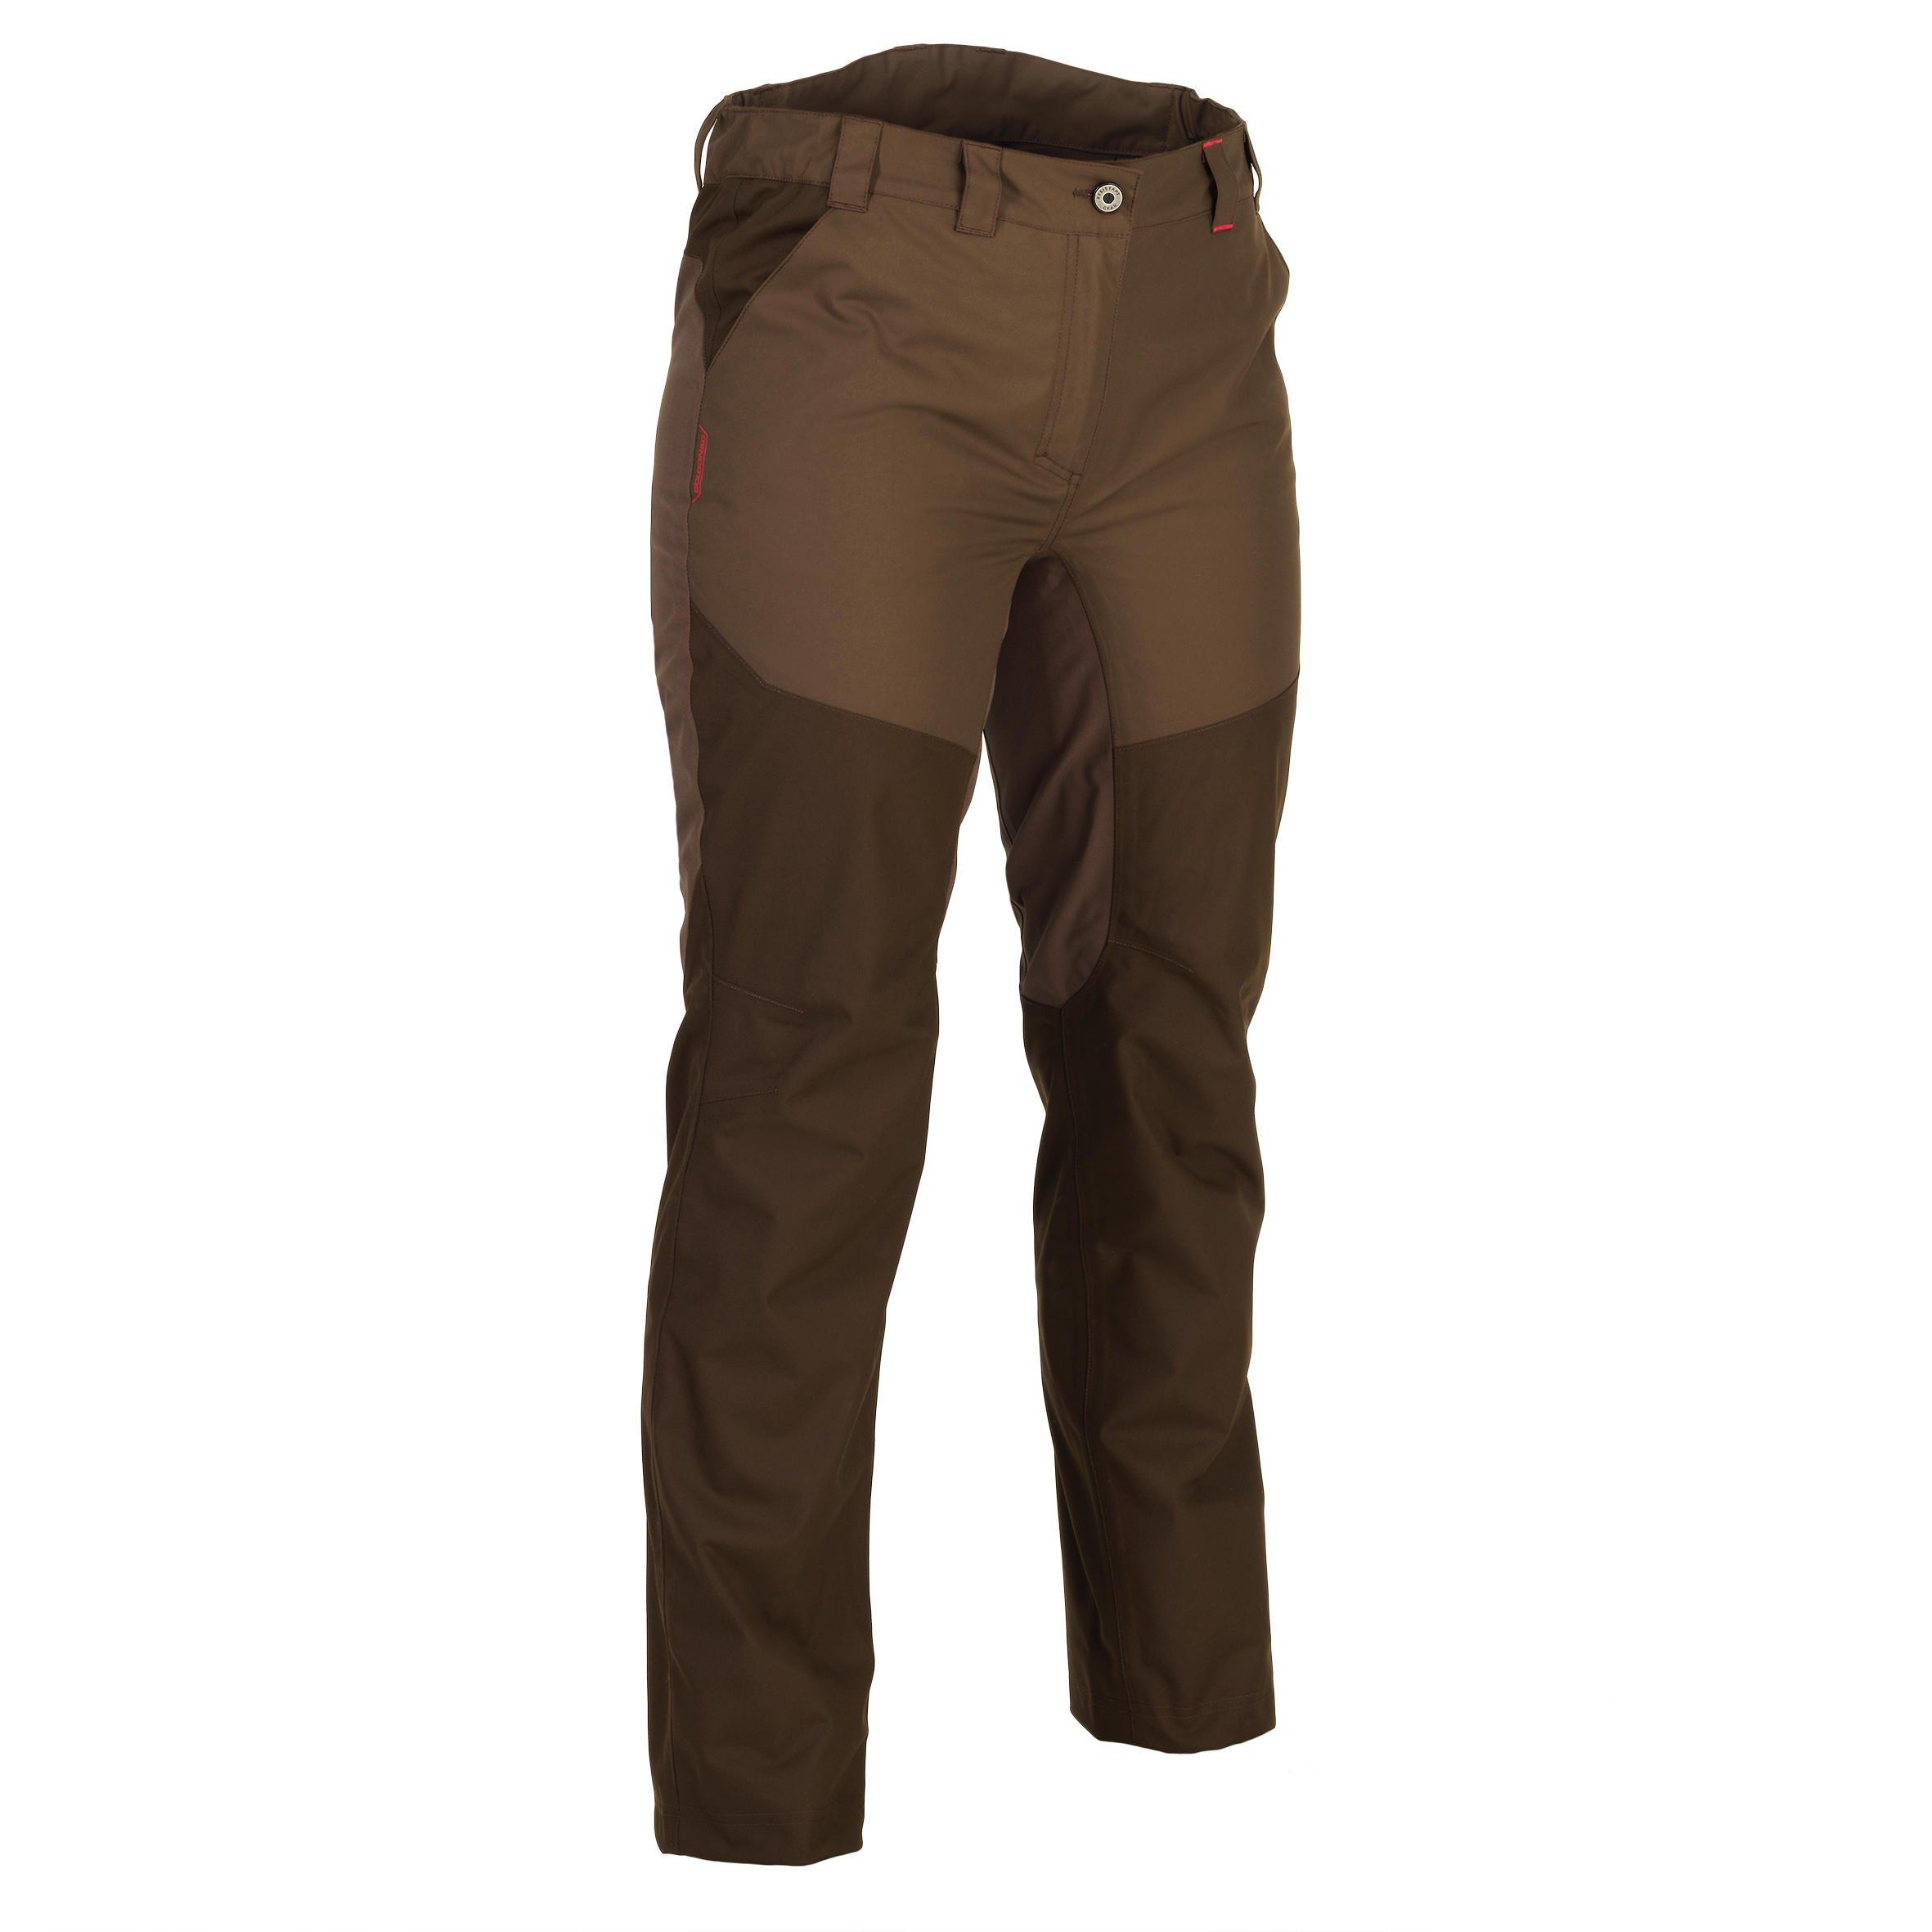 Men's Waterproof Hiking Over Trousers - NH500 Imper QUECHUA | Decathlon